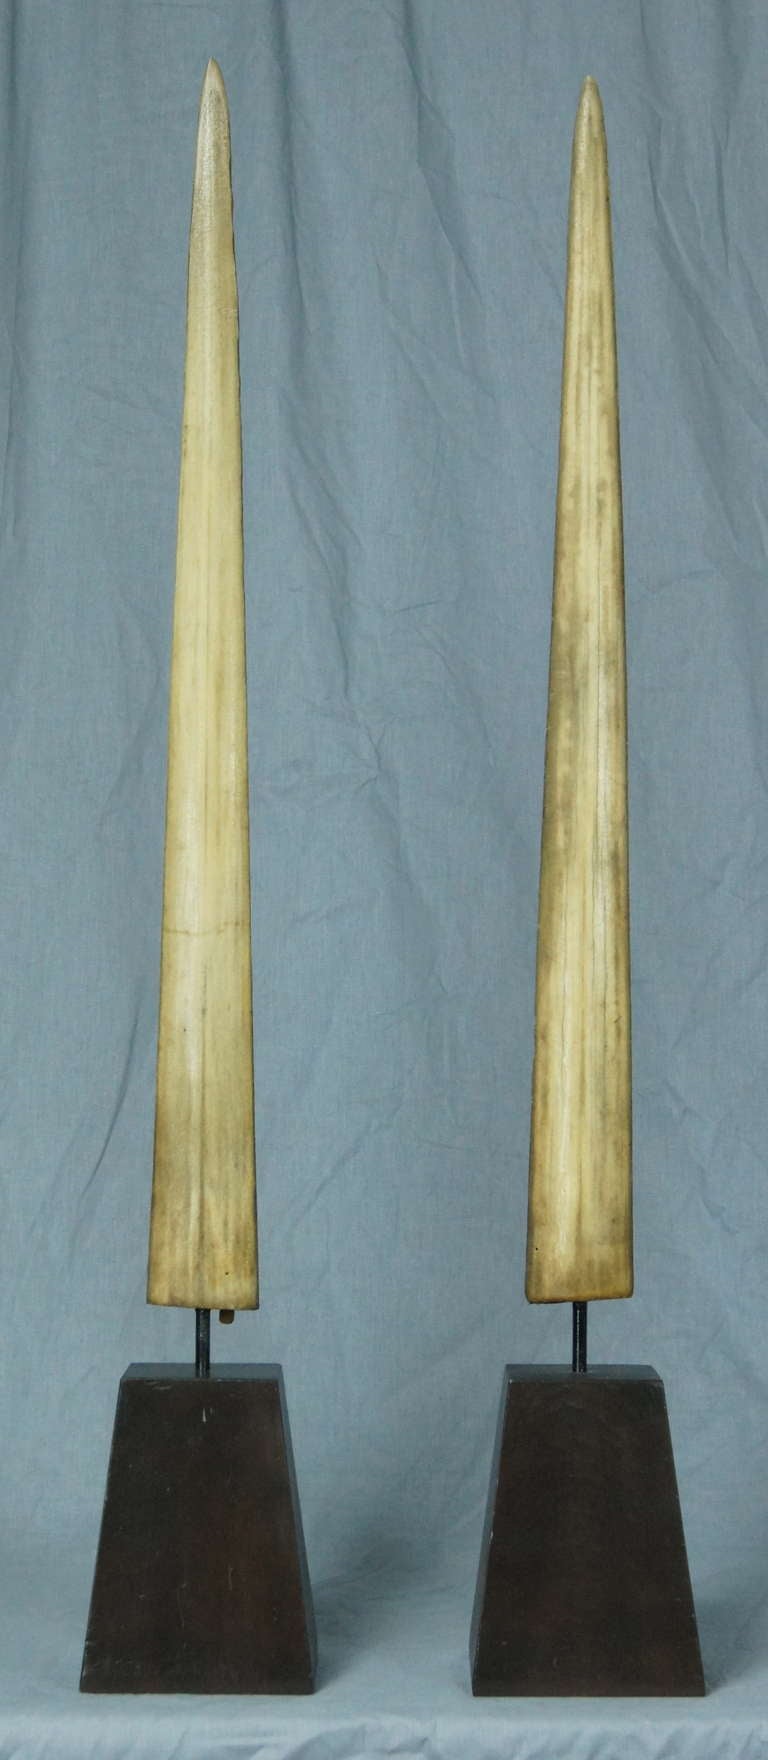 A pair of well proportioned swordfish bills on pyramidal shaped ebonized bases.